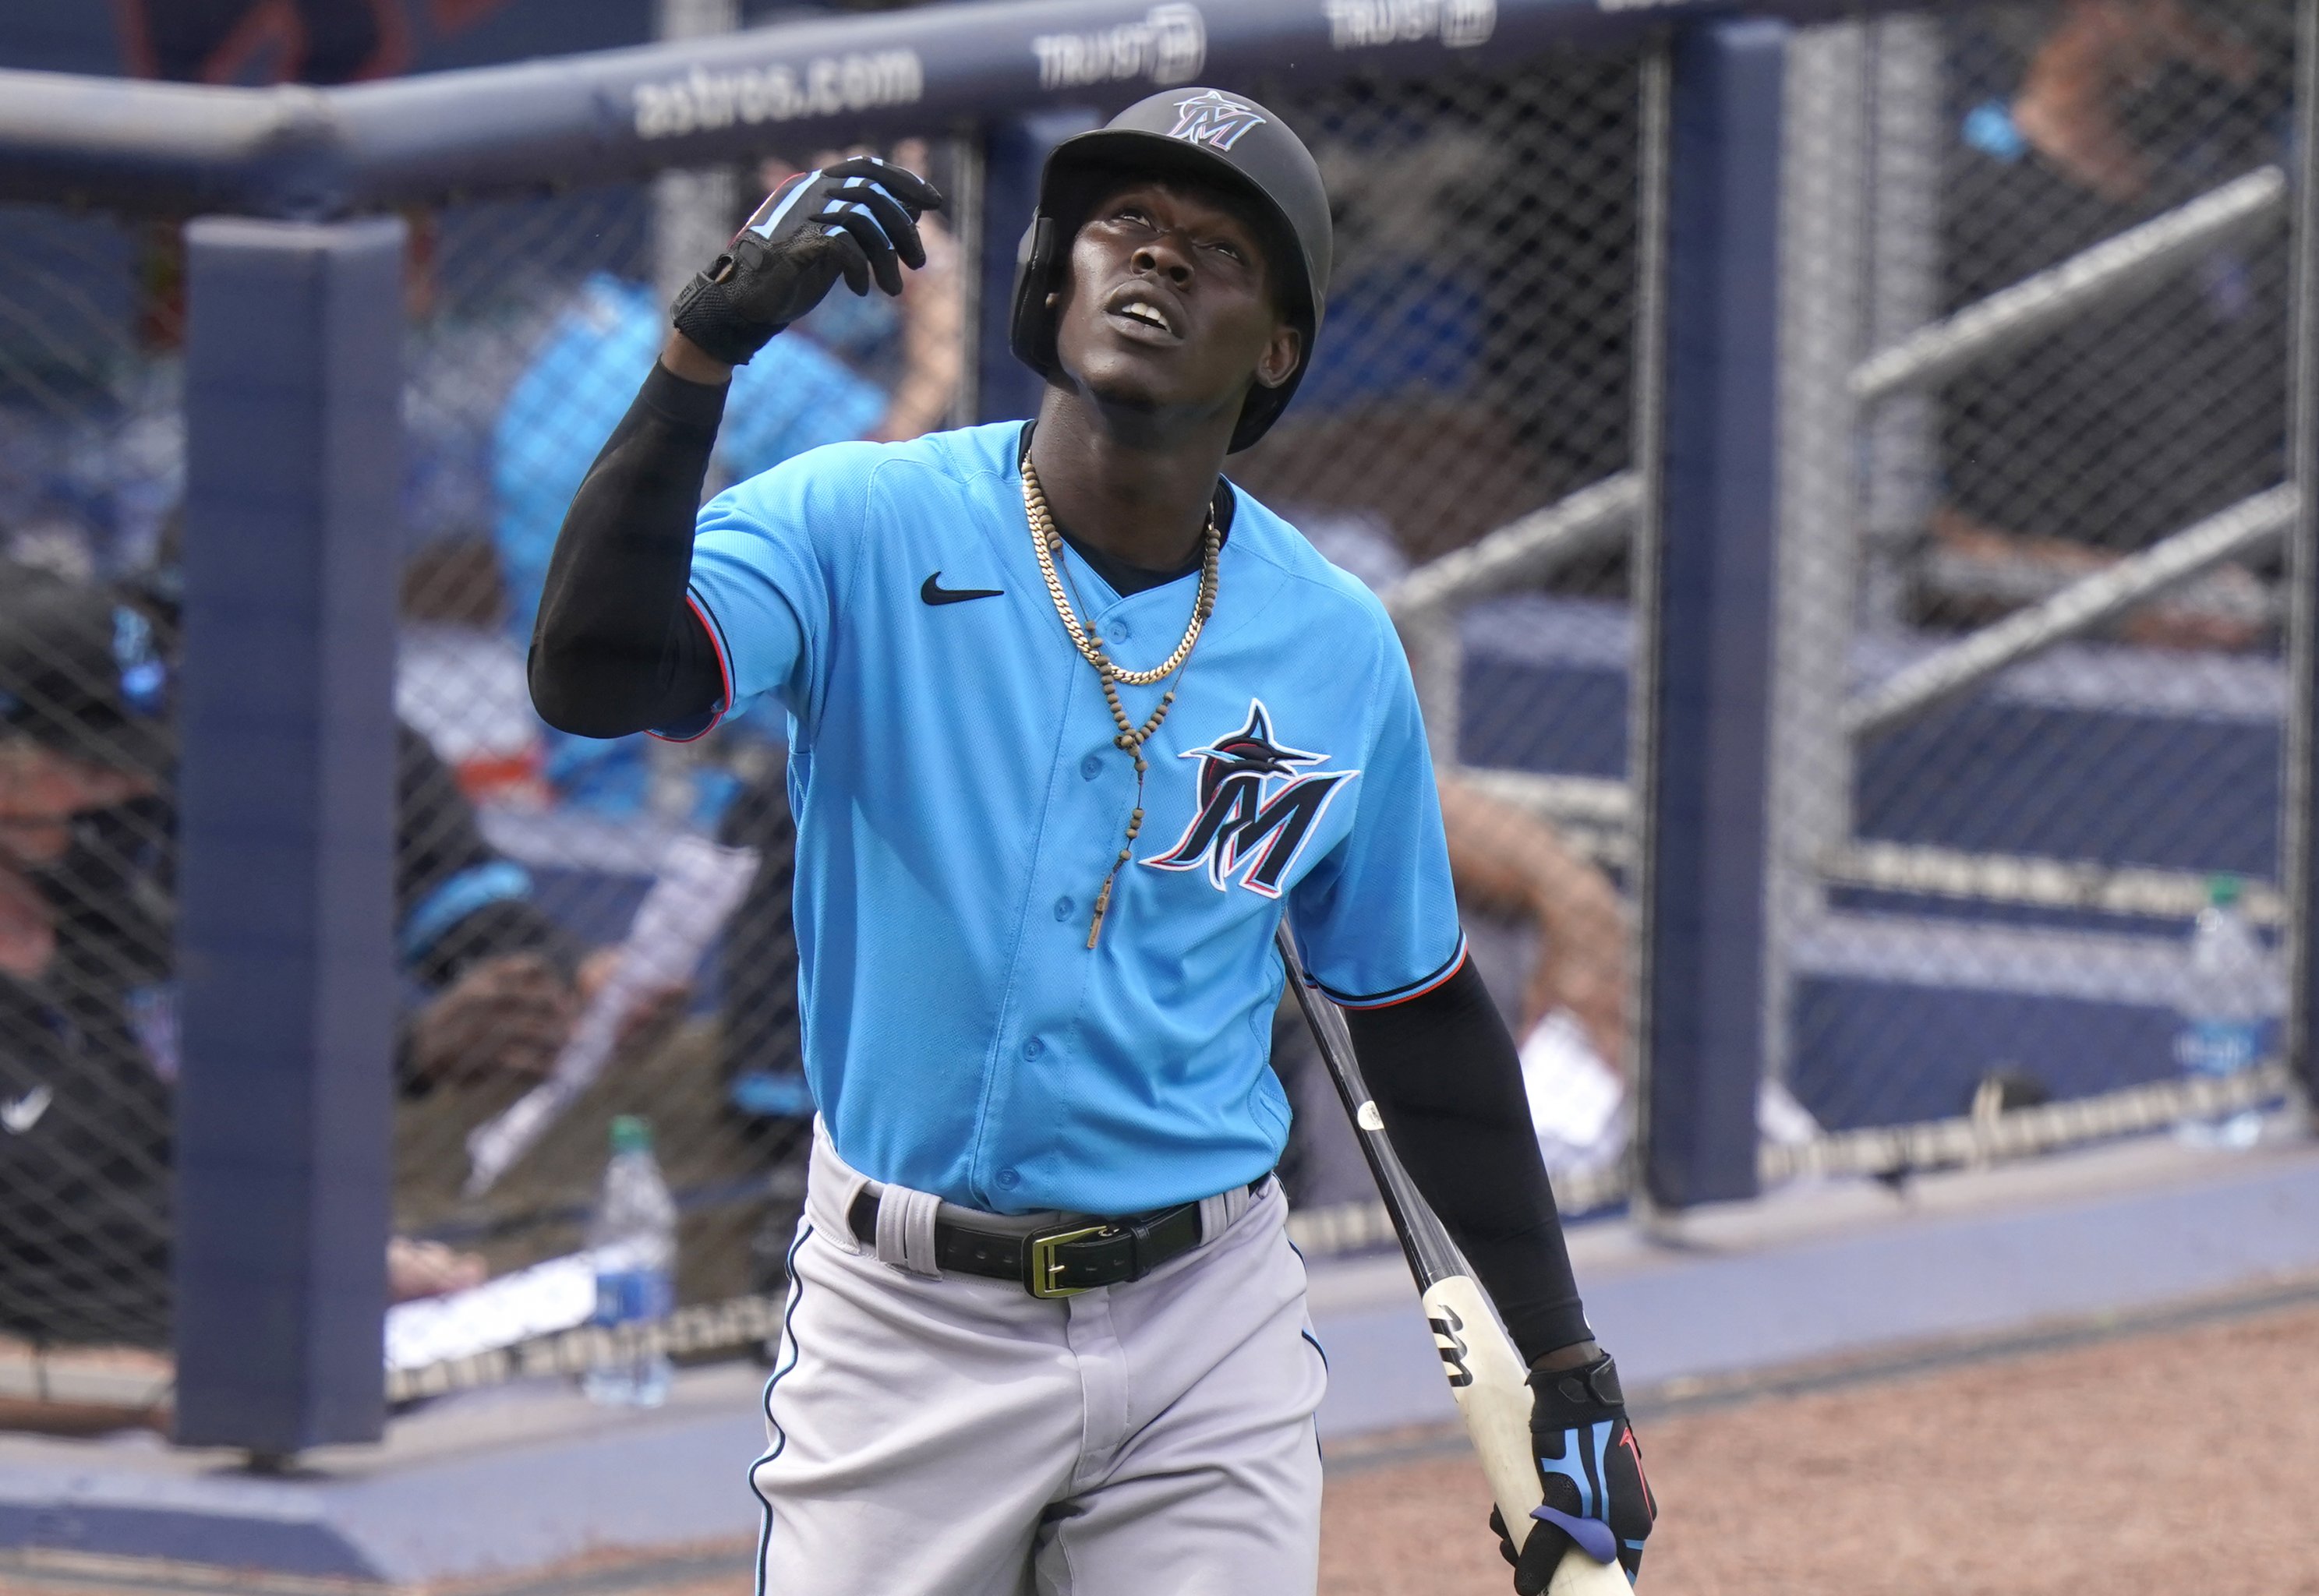 Jazz Chisholm Miami Marlins Home Jersey for Sale in Fort Myers